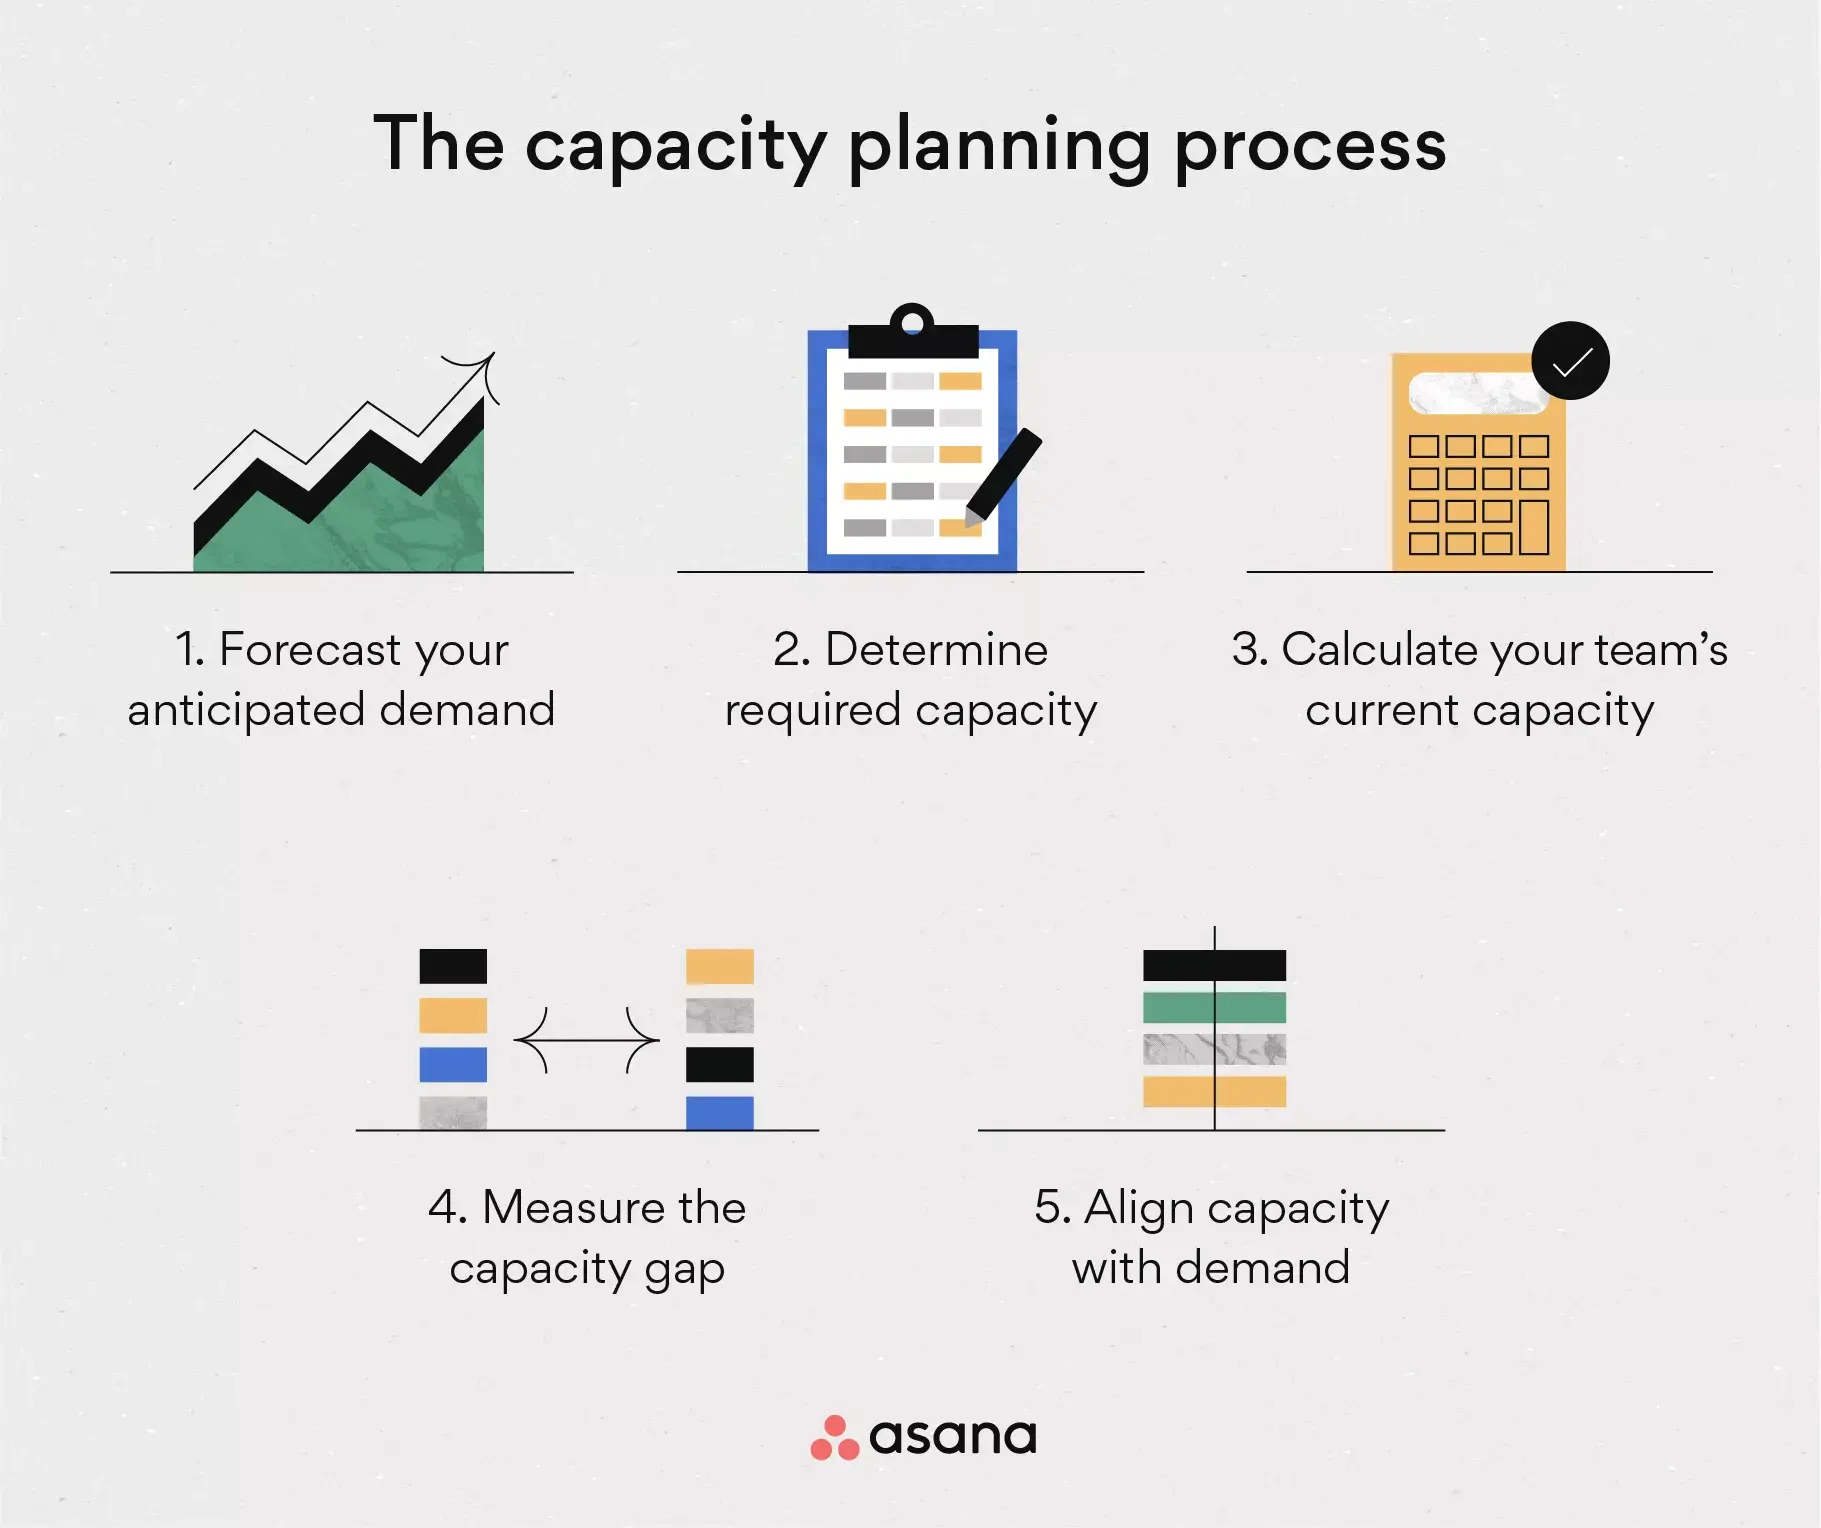 [inline illustration] The capacity planning process (infographic)